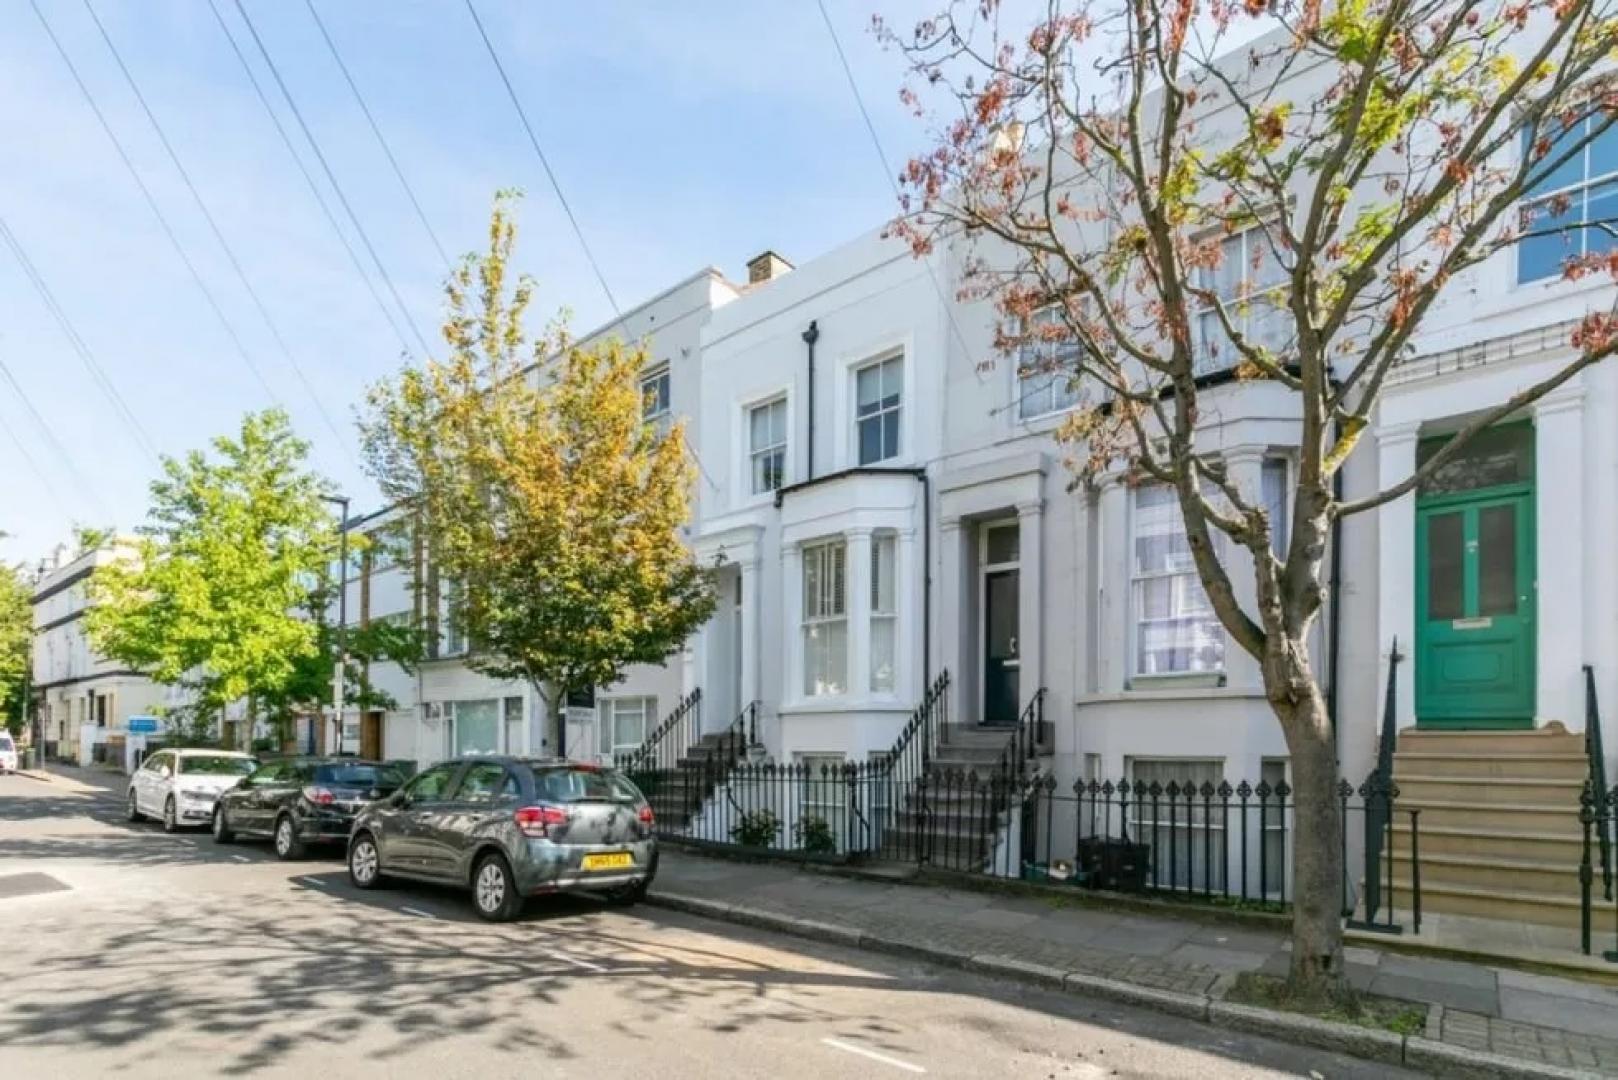 4 bedroom house with garden located close to finsbury park station Berriman Road, Finsbury Park / Holloway